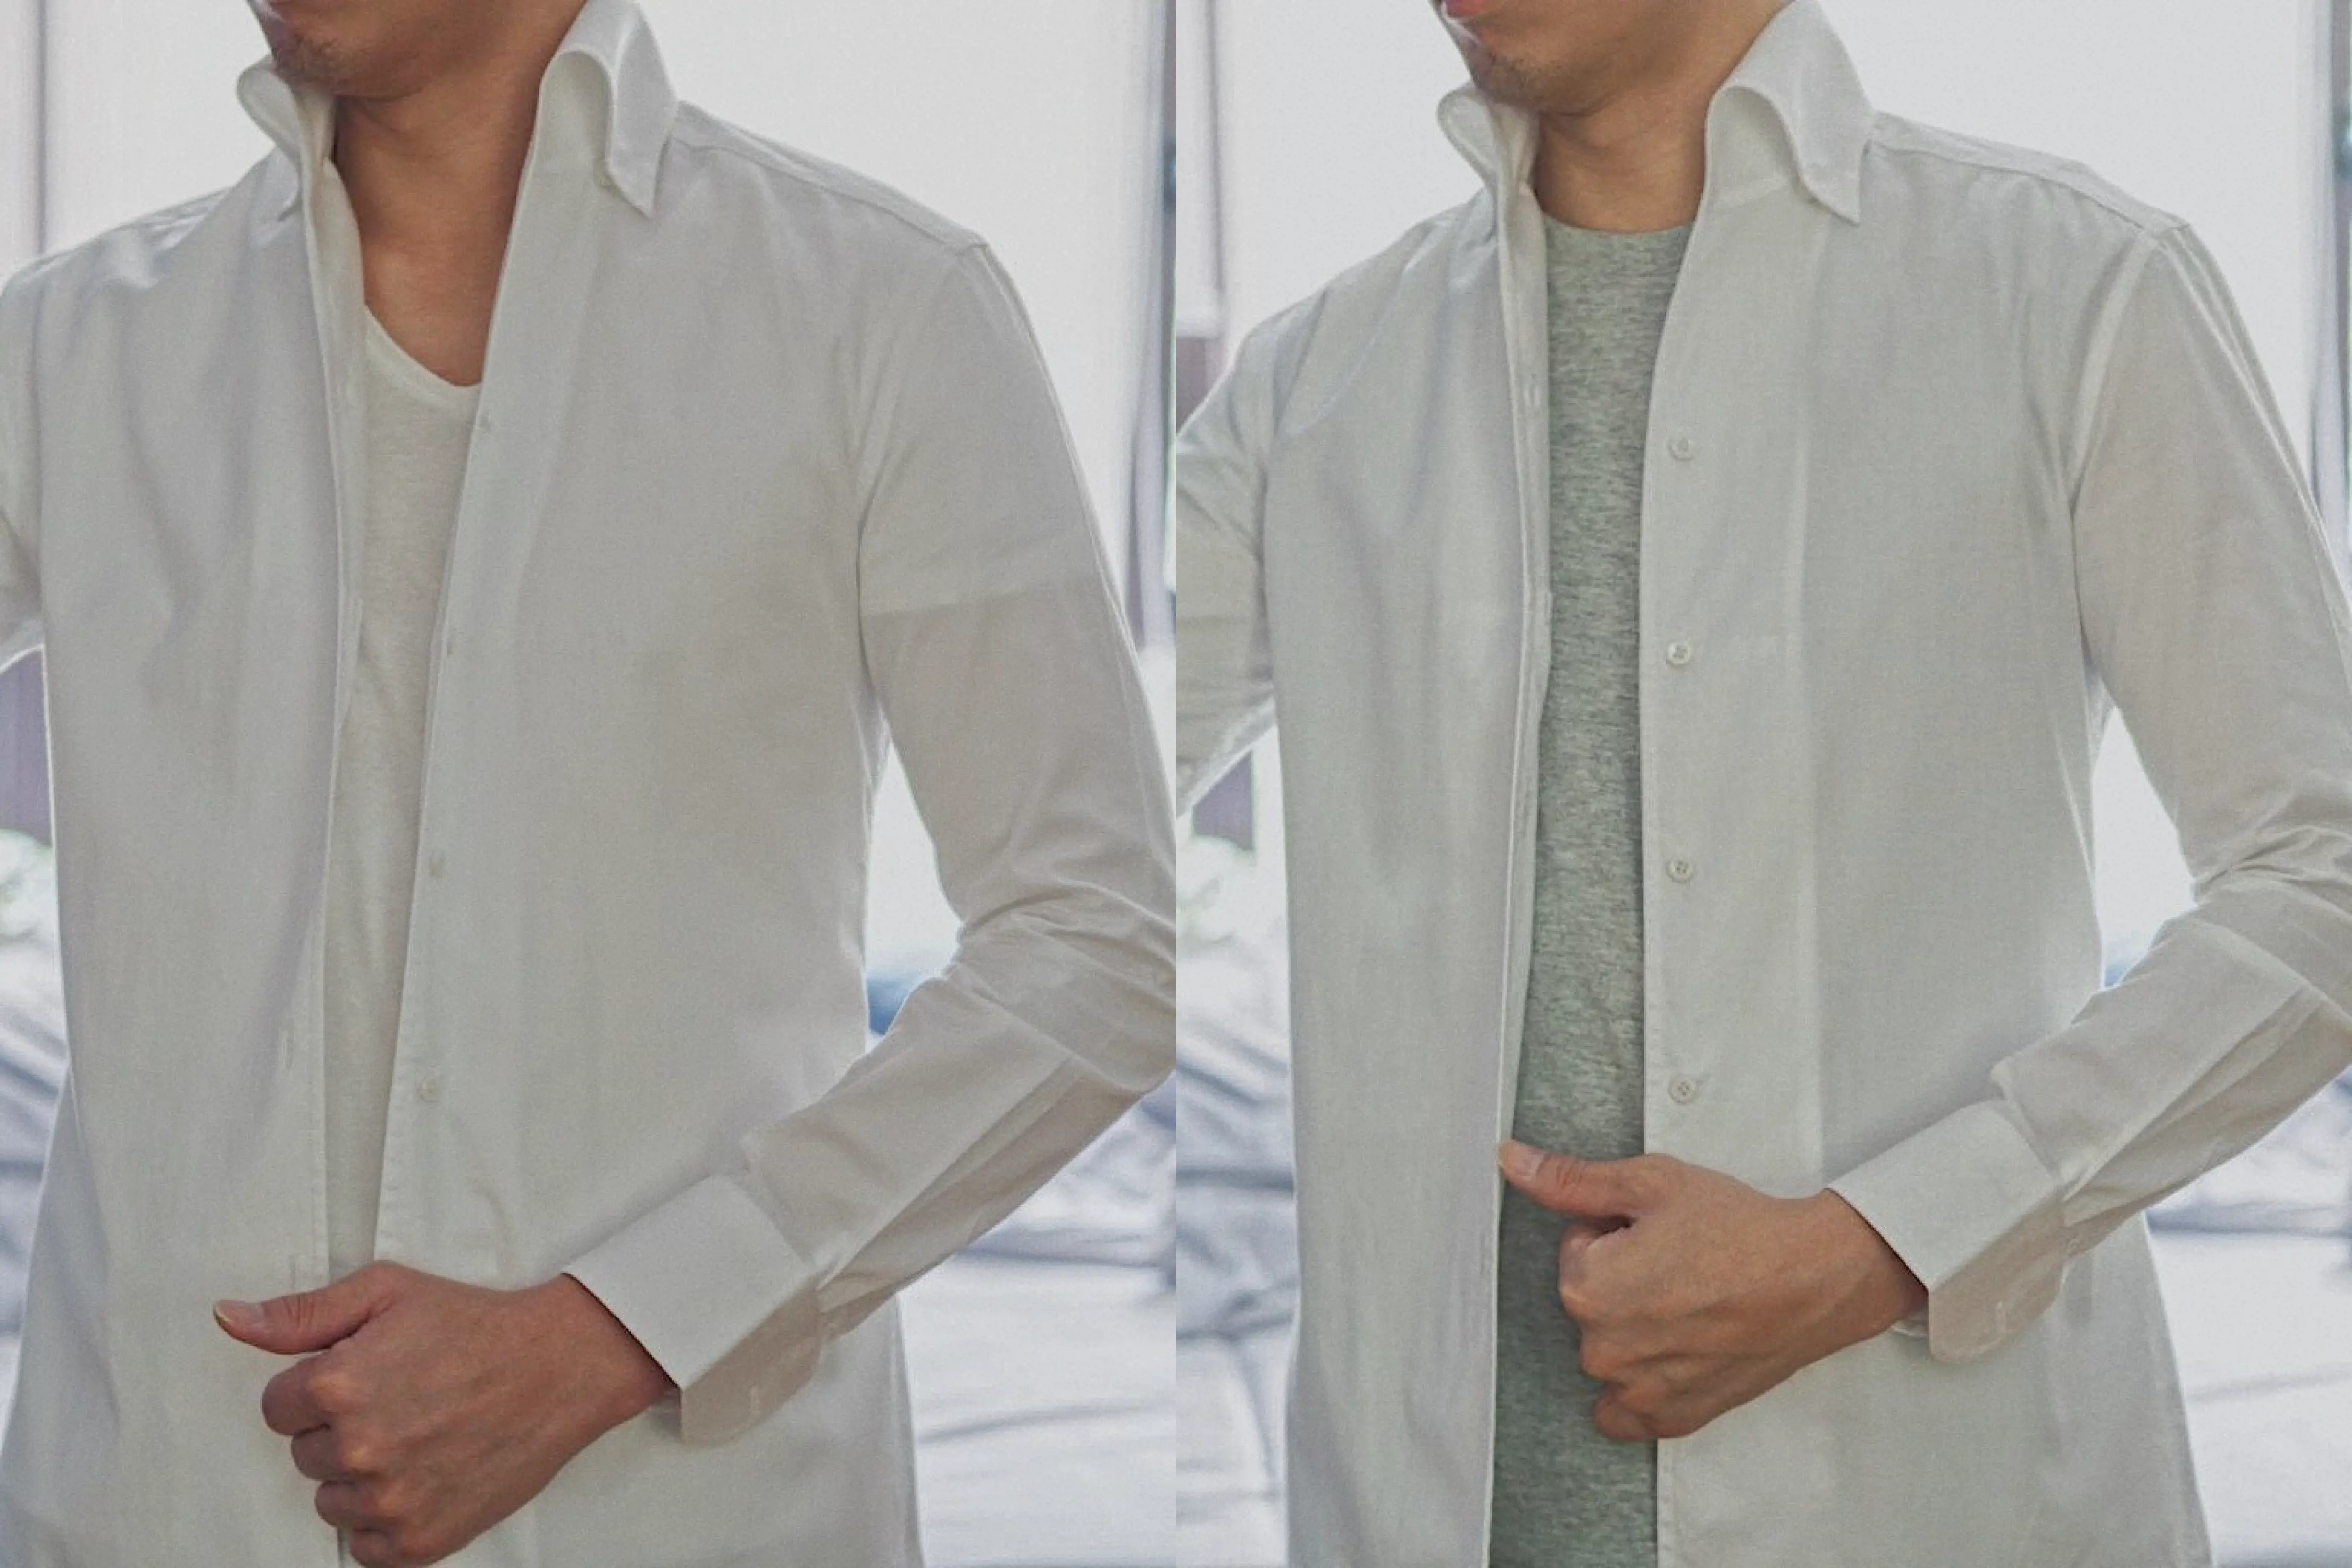 Choosing The Right Undershirt Color To Pair With A White Dress Shirt ...